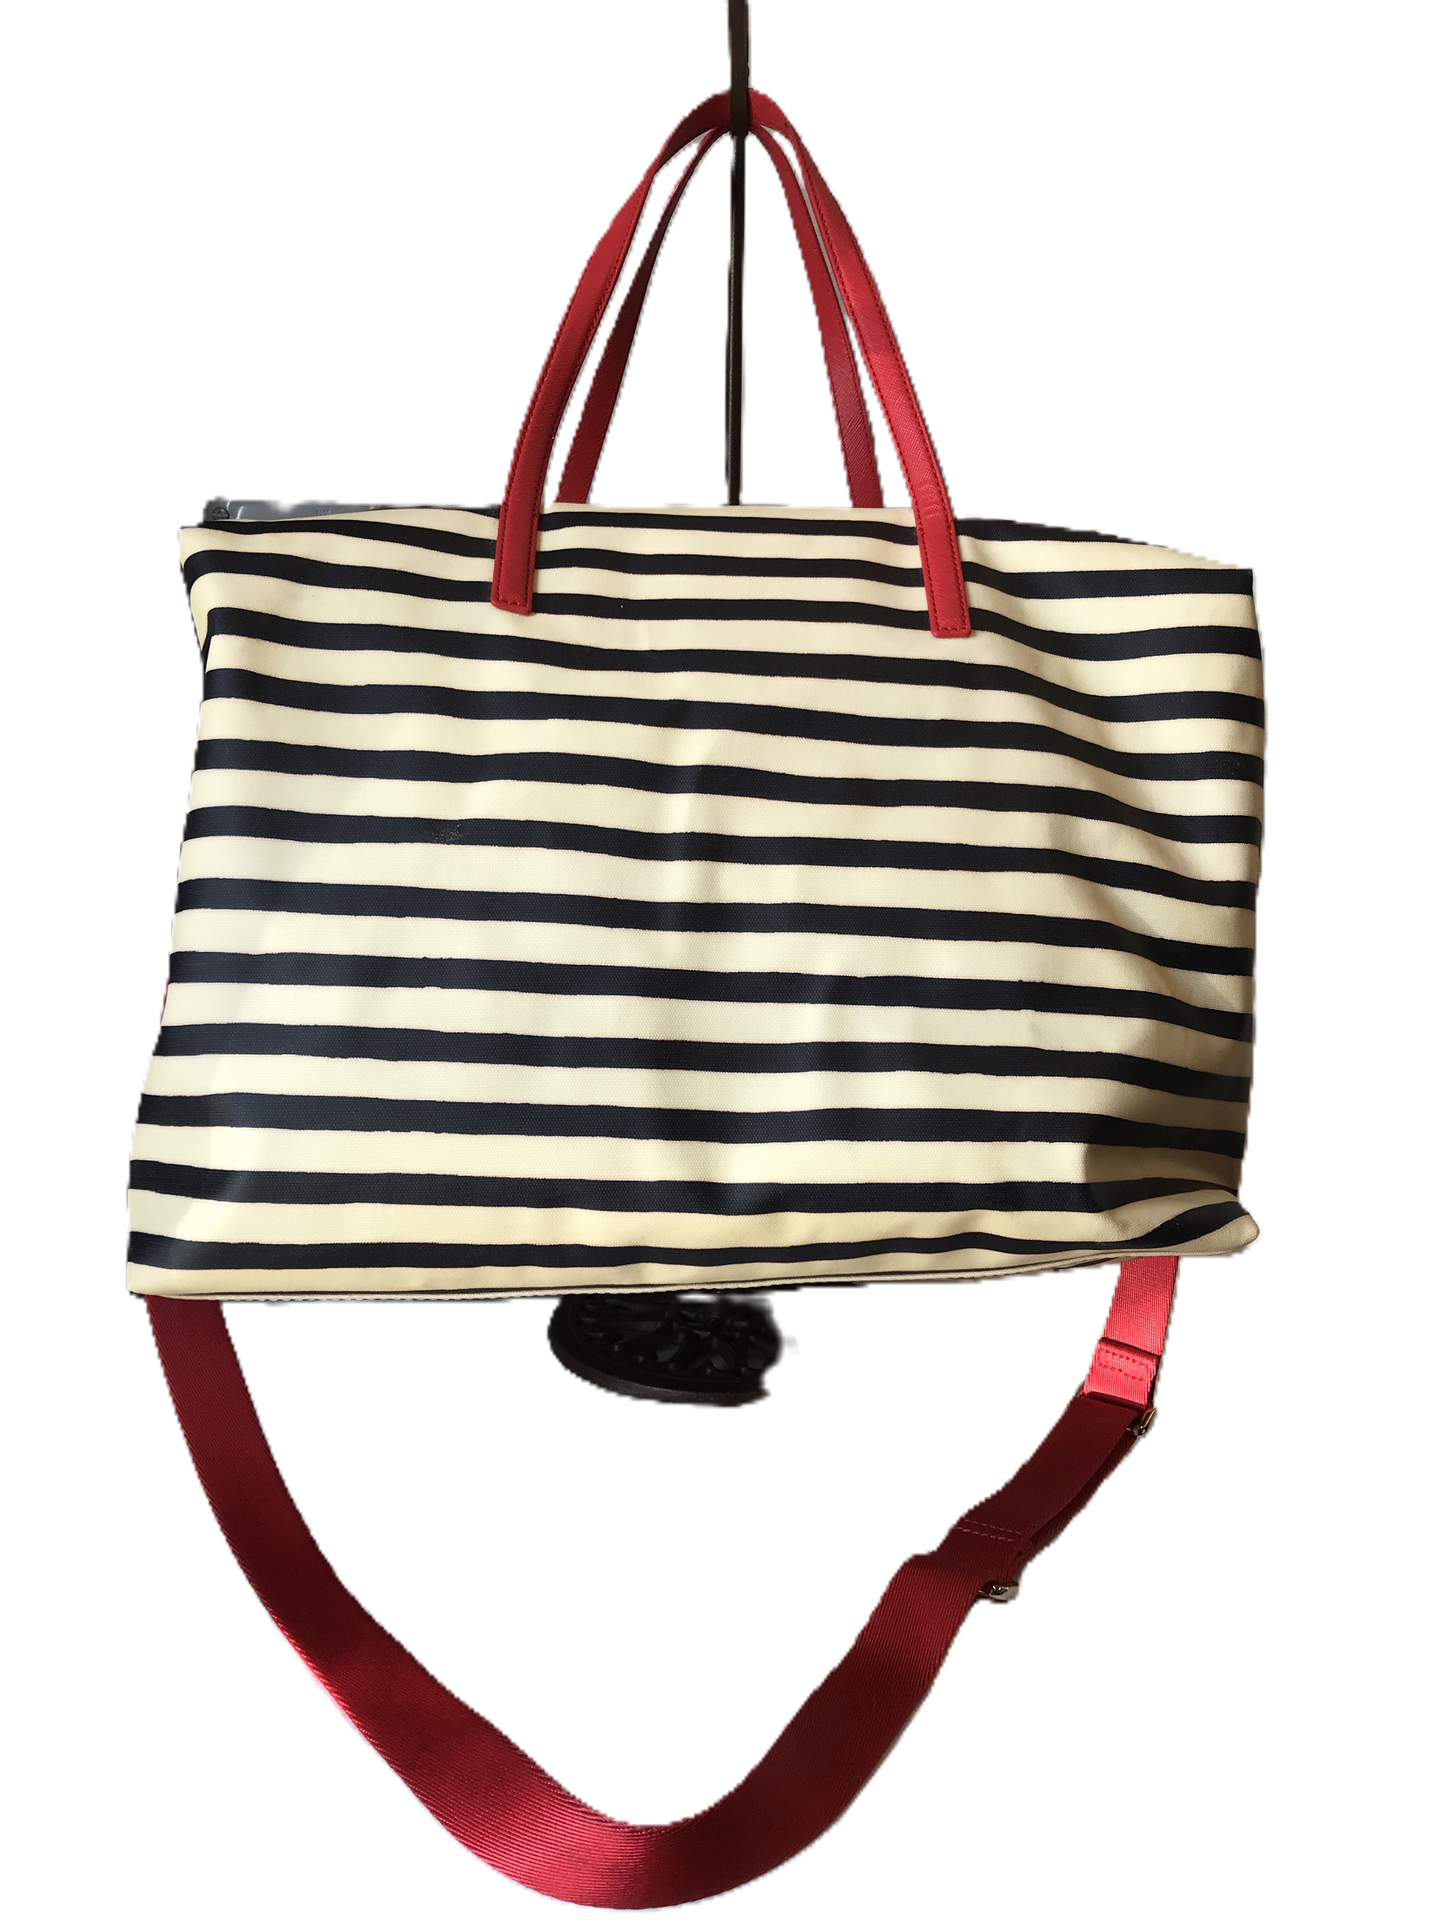 Tote Designer By Kate Spade, Size: Large